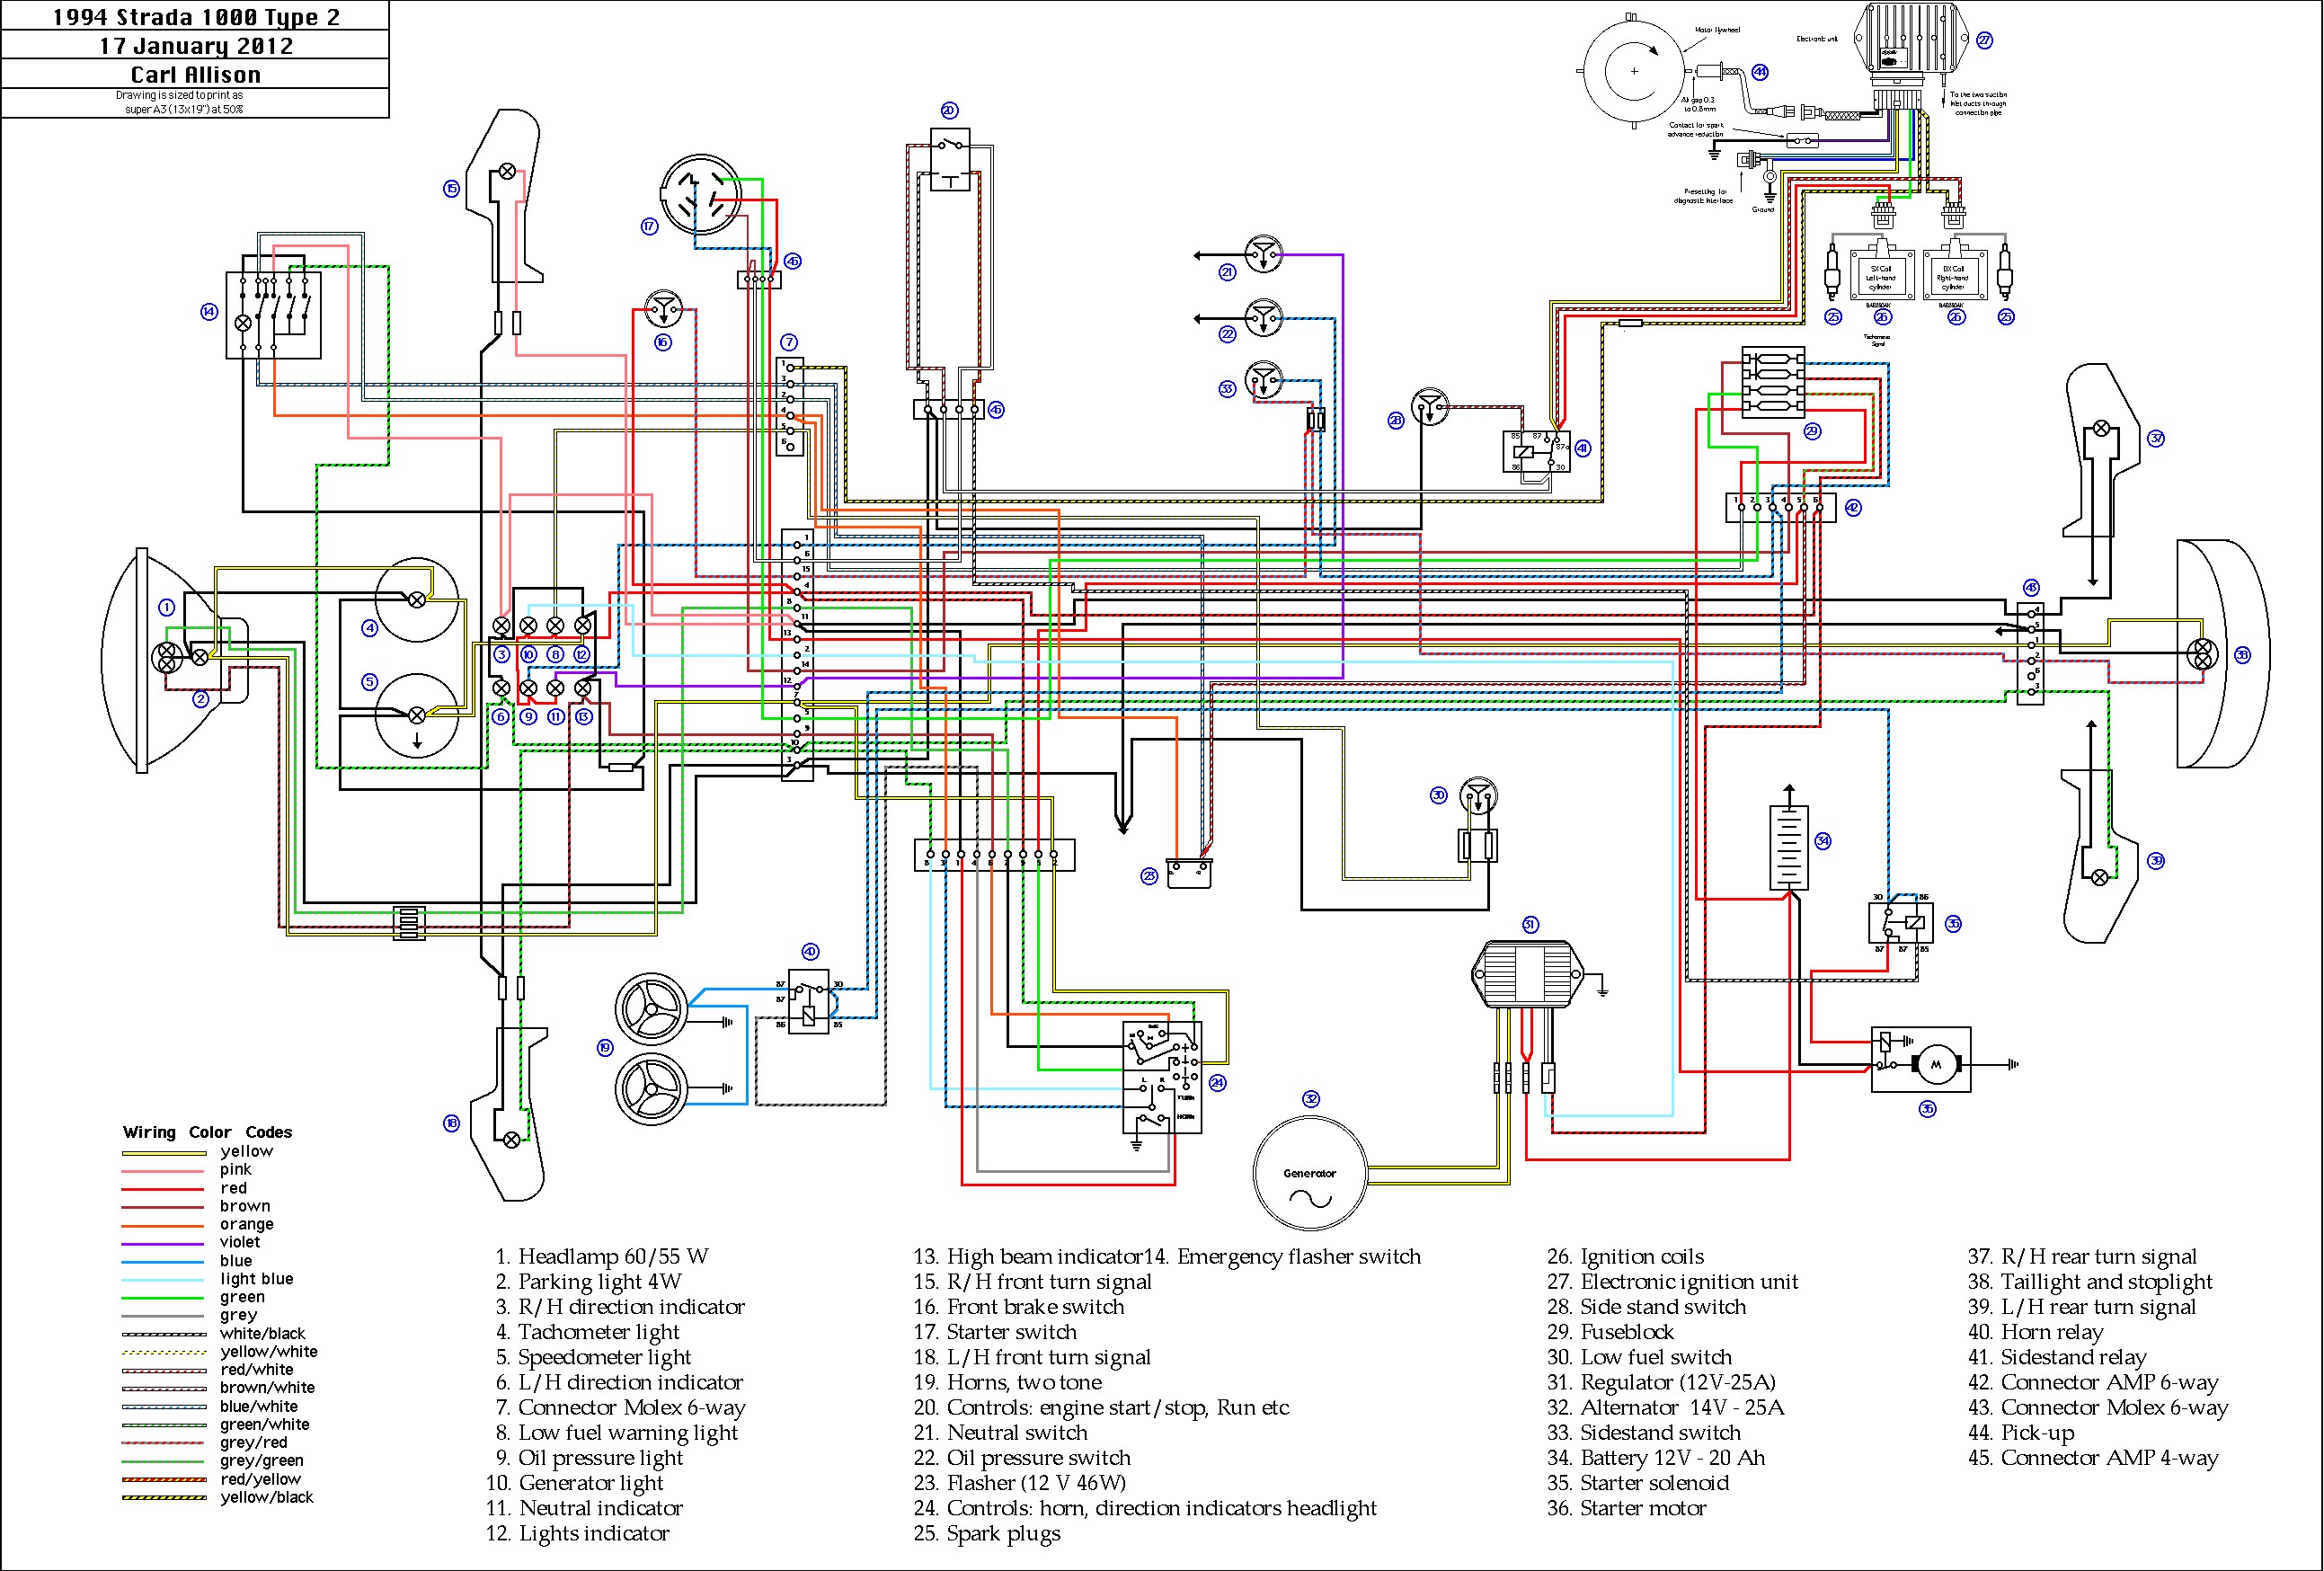 Vauxhall Corsa 1 2 Engine Diagram Vauxhall Bo Wiring Diagram Pdf Along with Opel astra Wiring Of Vauxhall Corsa 1 2 Engine Diagram